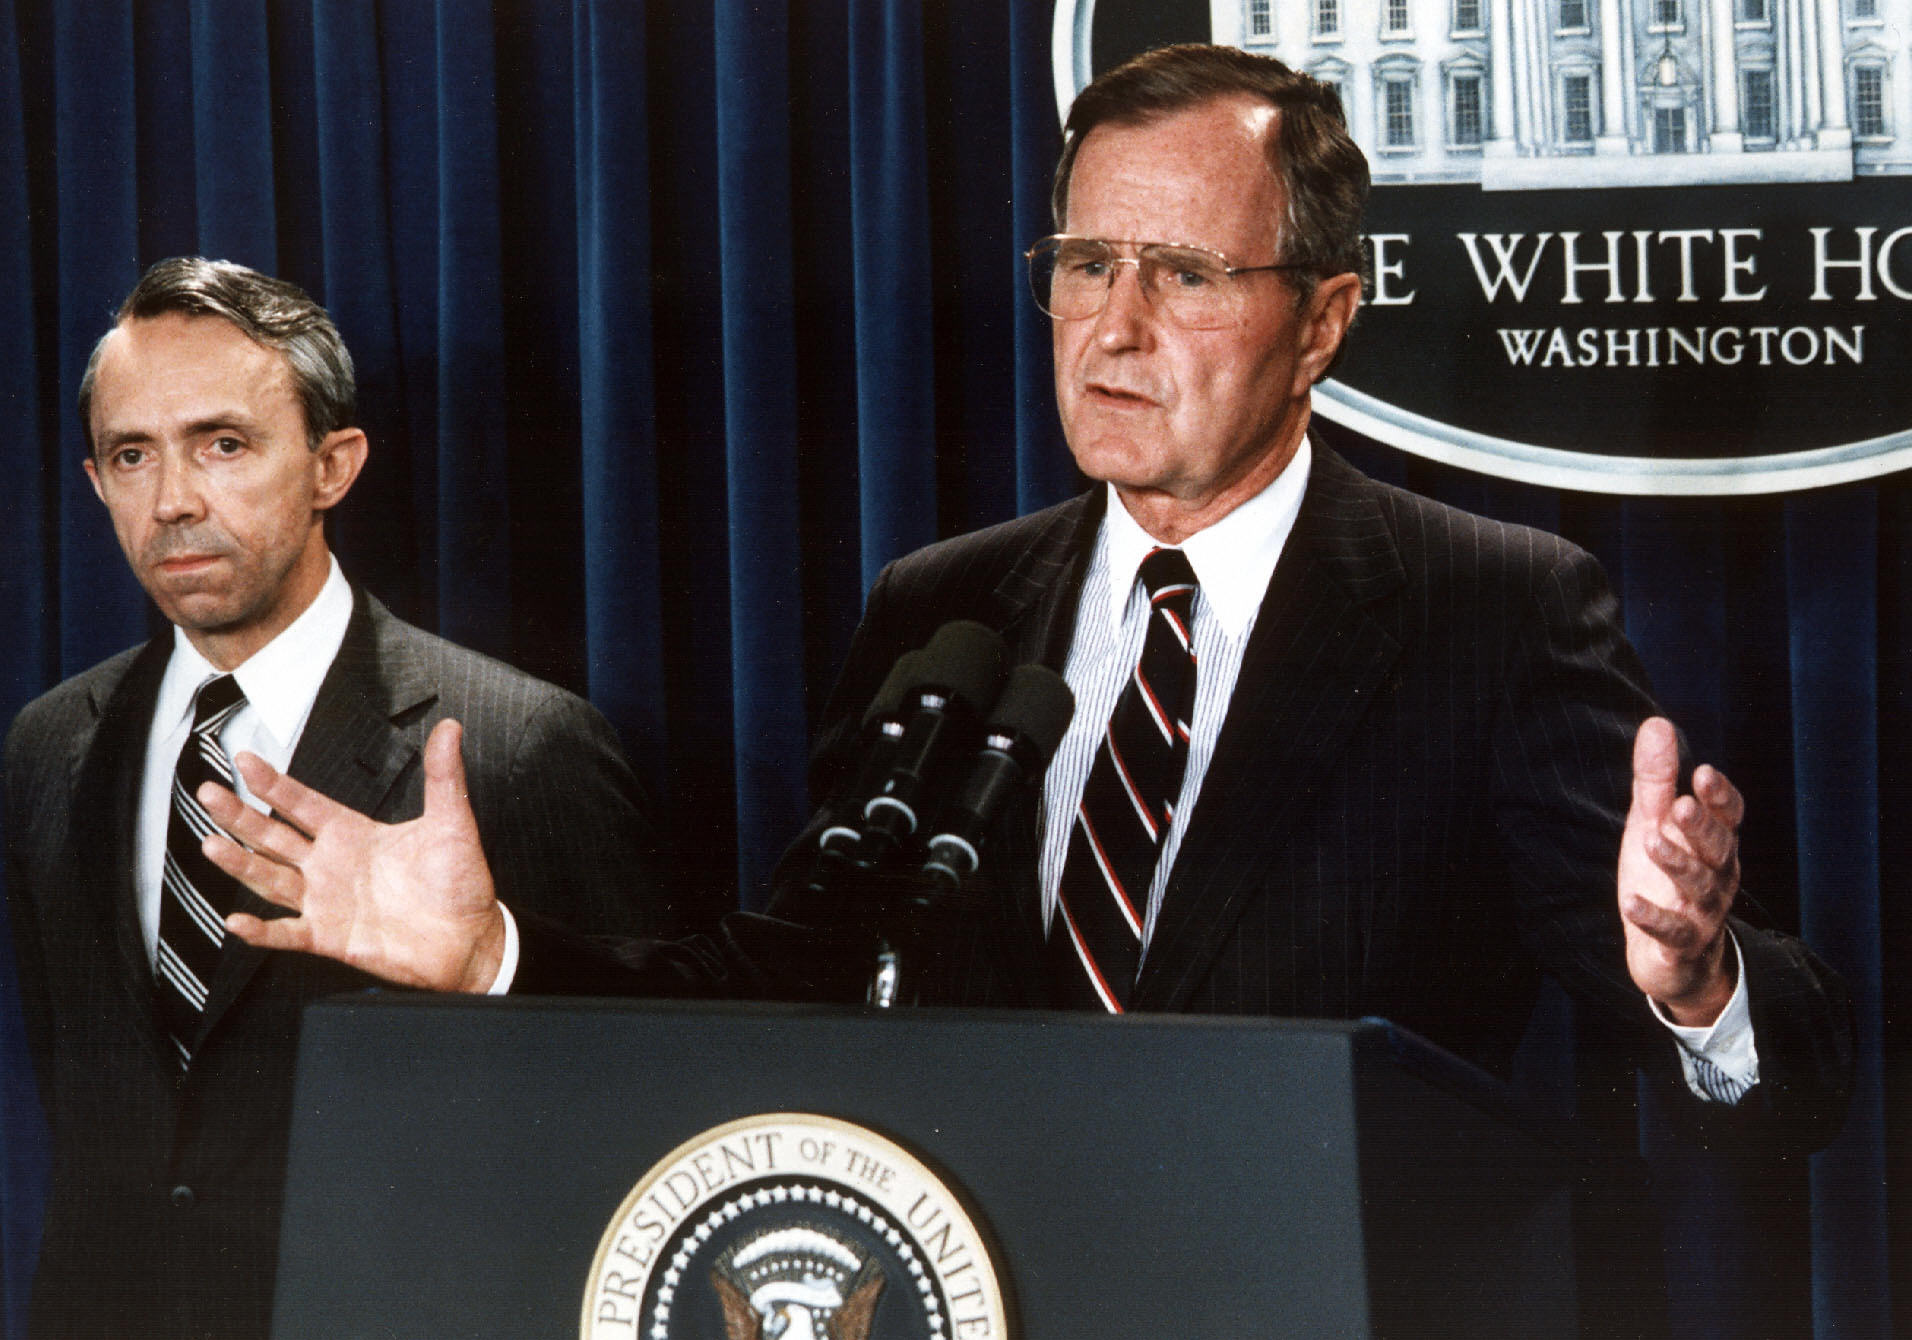 PHOTO: George H. W. Bush at the White House in Washington, July 23, 1990.